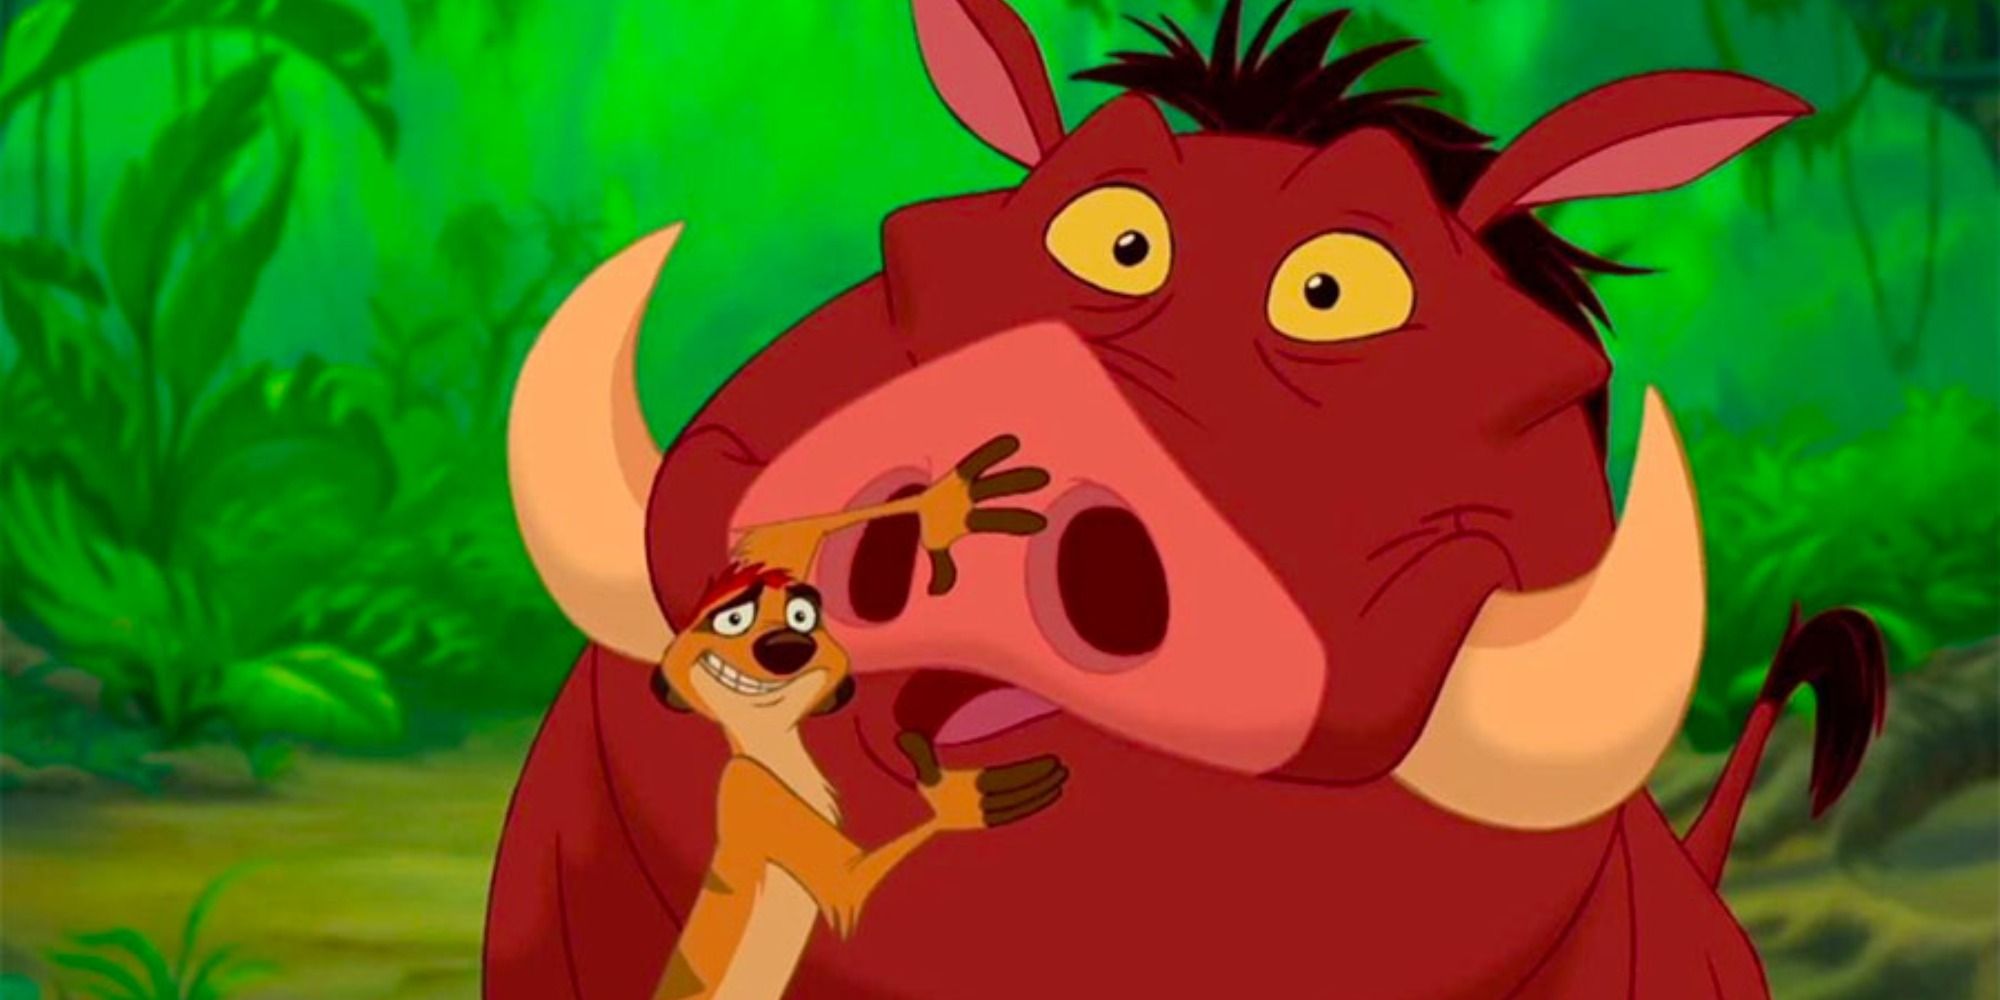 Timon and Pumbaa in The Lion King